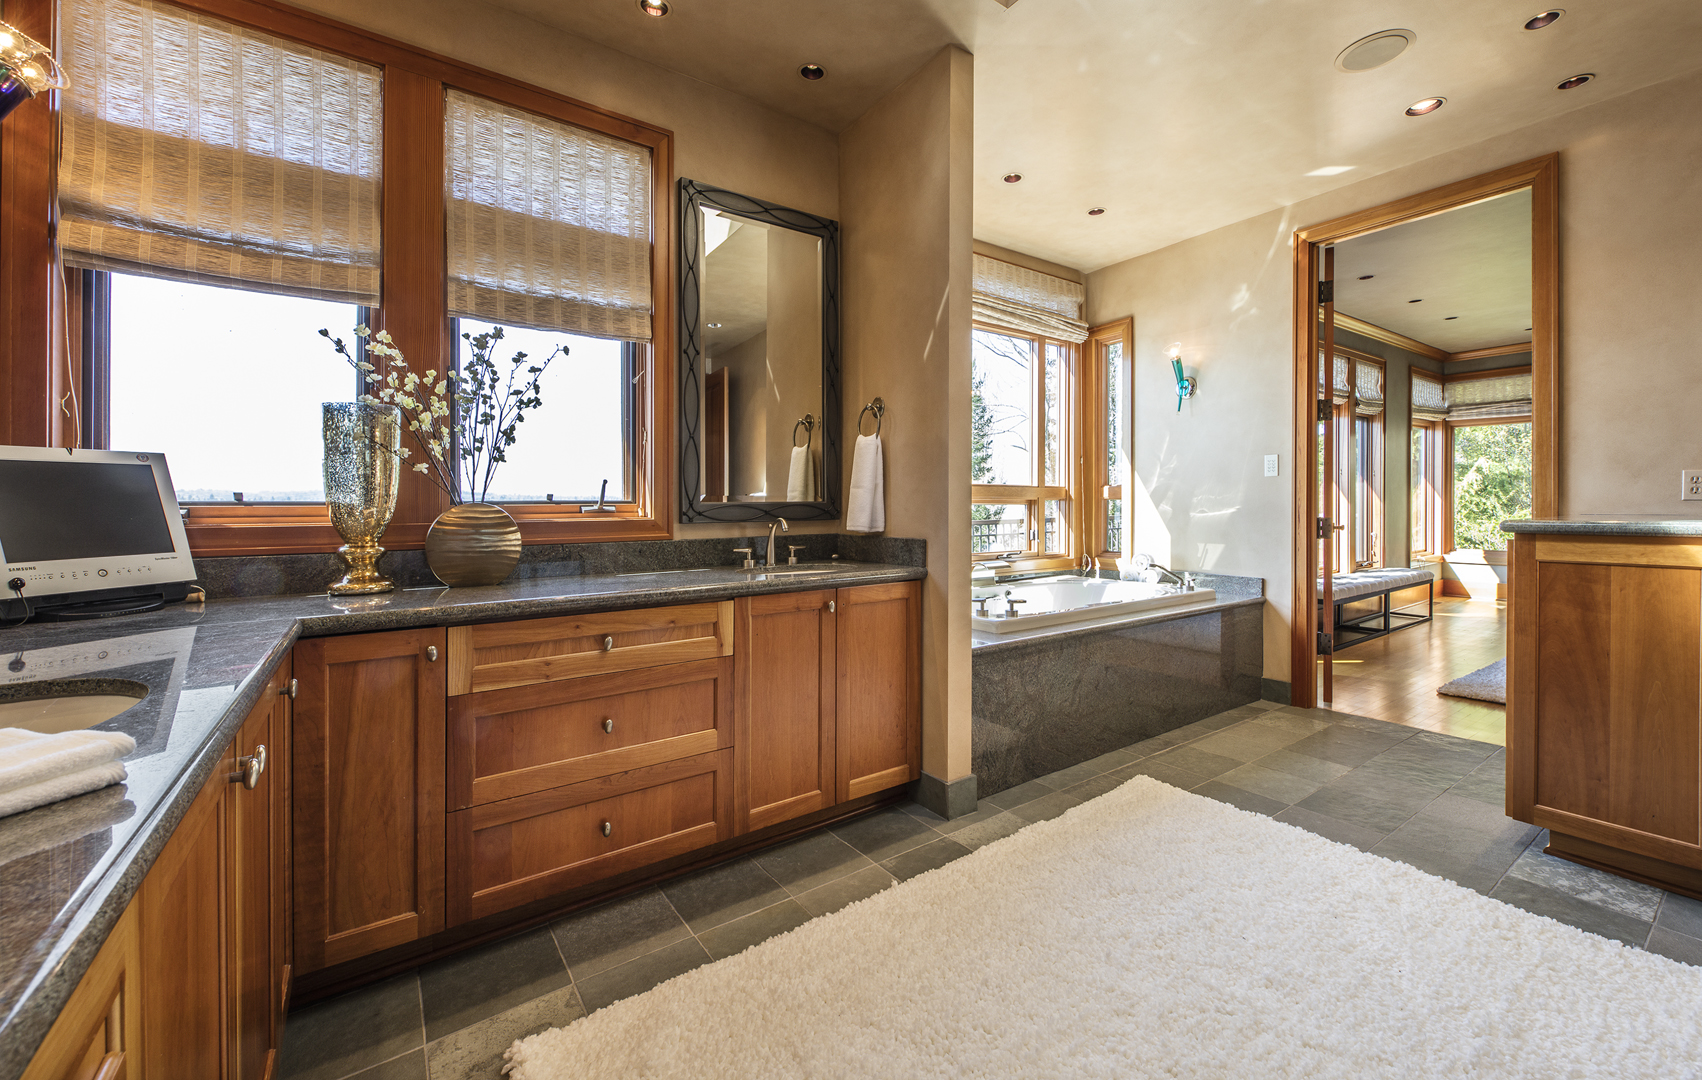 Photo of Master Bathroom in PNW home designed by a Seattle Residential Architect